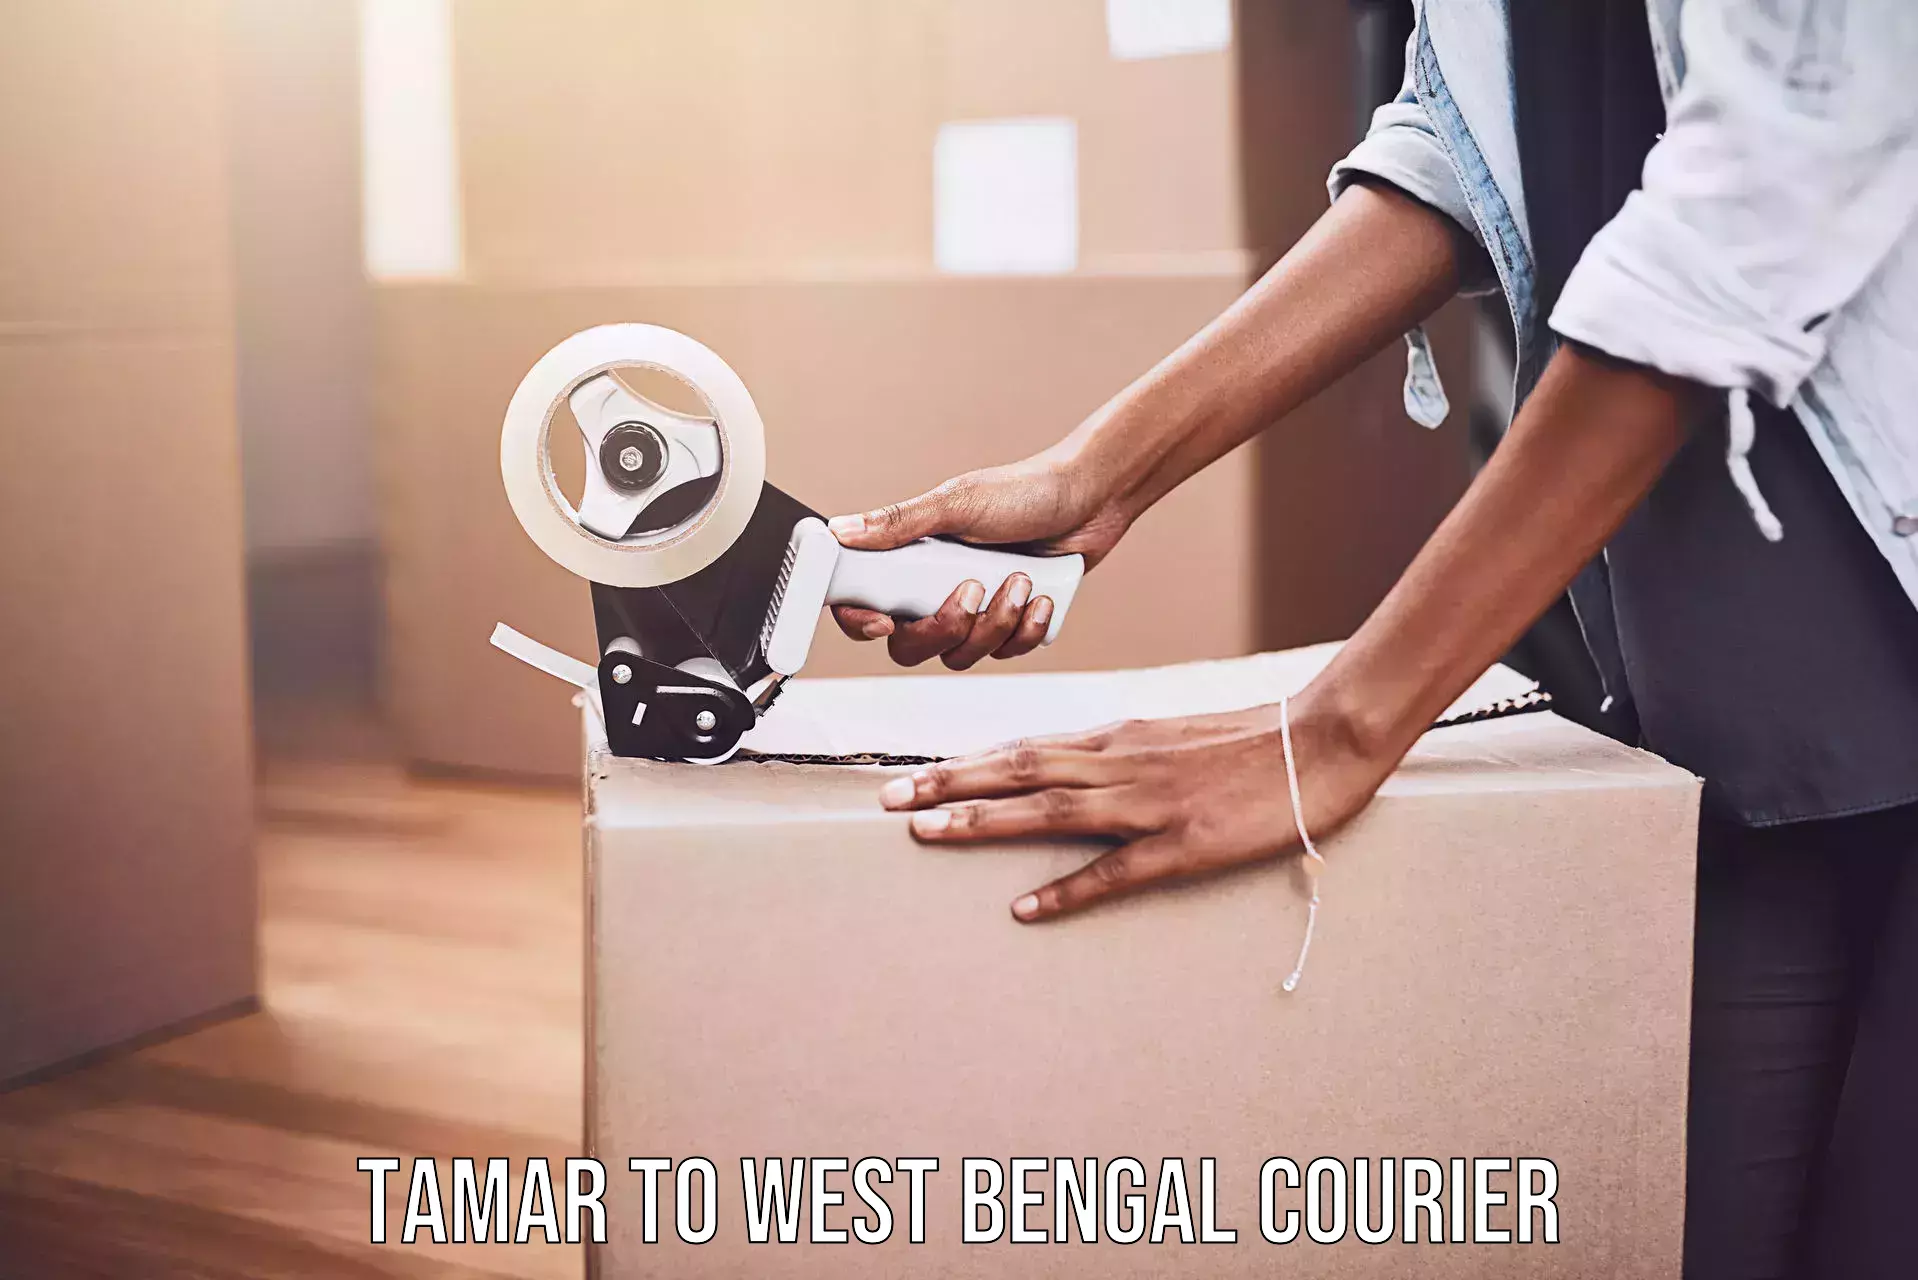 Express delivery capabilities Tamar to West Bengal